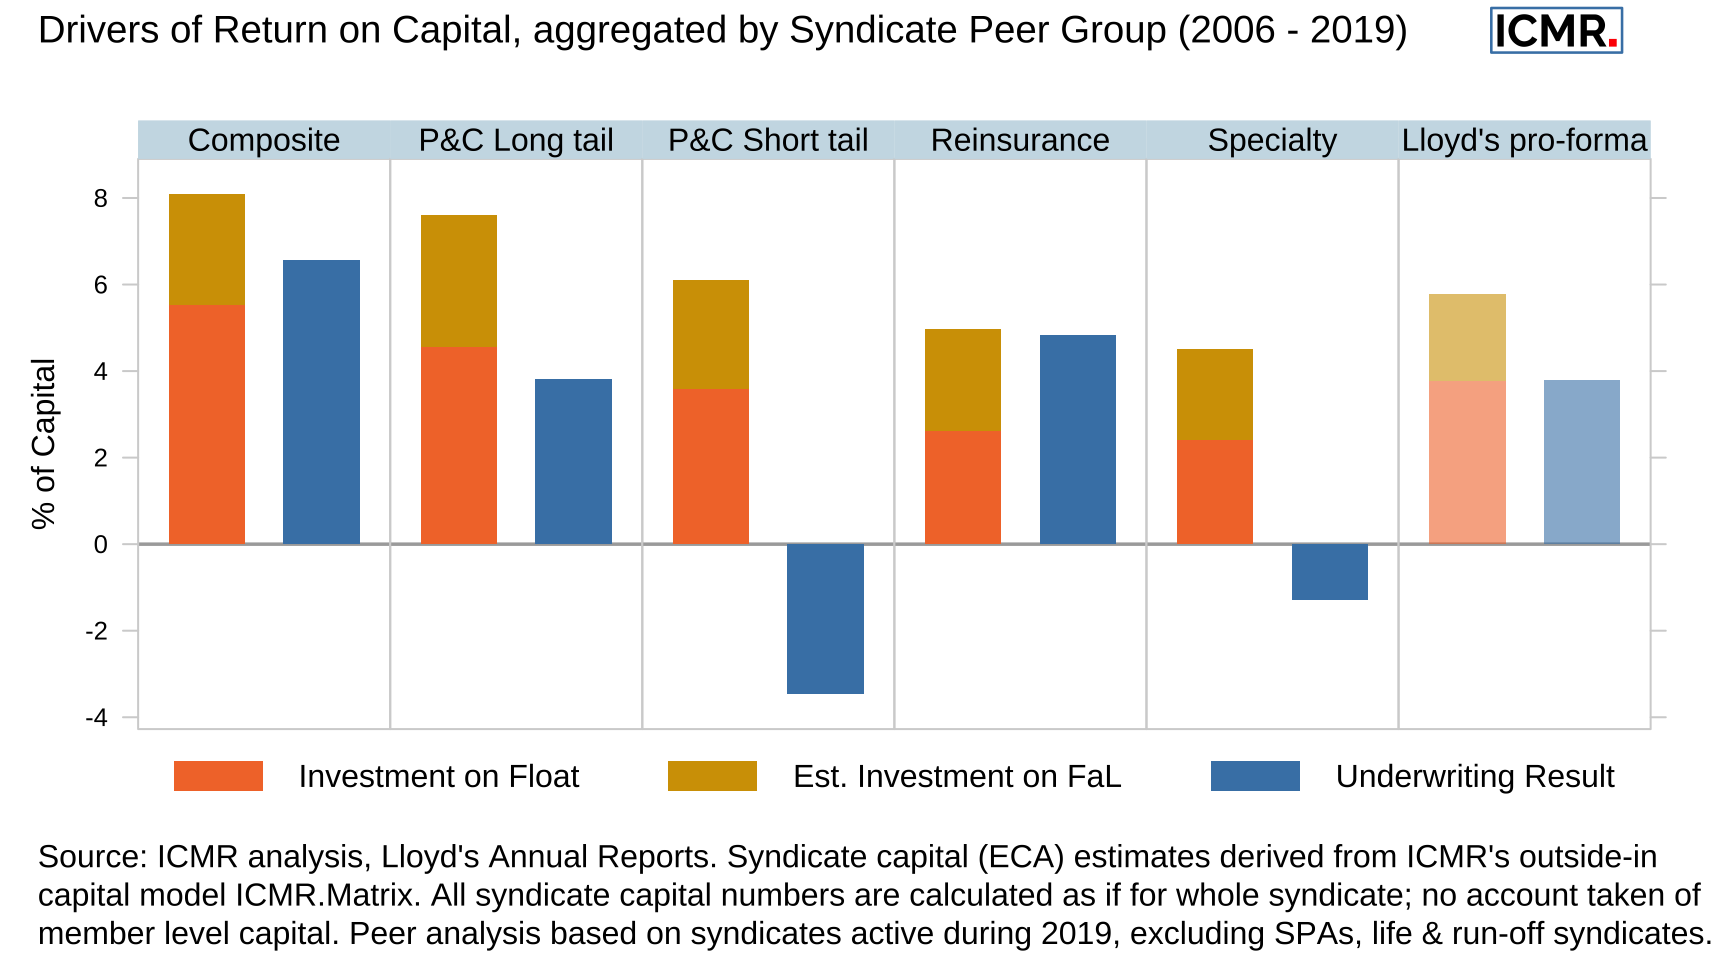 Split of average annual returns on capital between underwriting and investment return over the period 2006 - 2019 for different syndicate peer groups and Lloyd’s as a whole